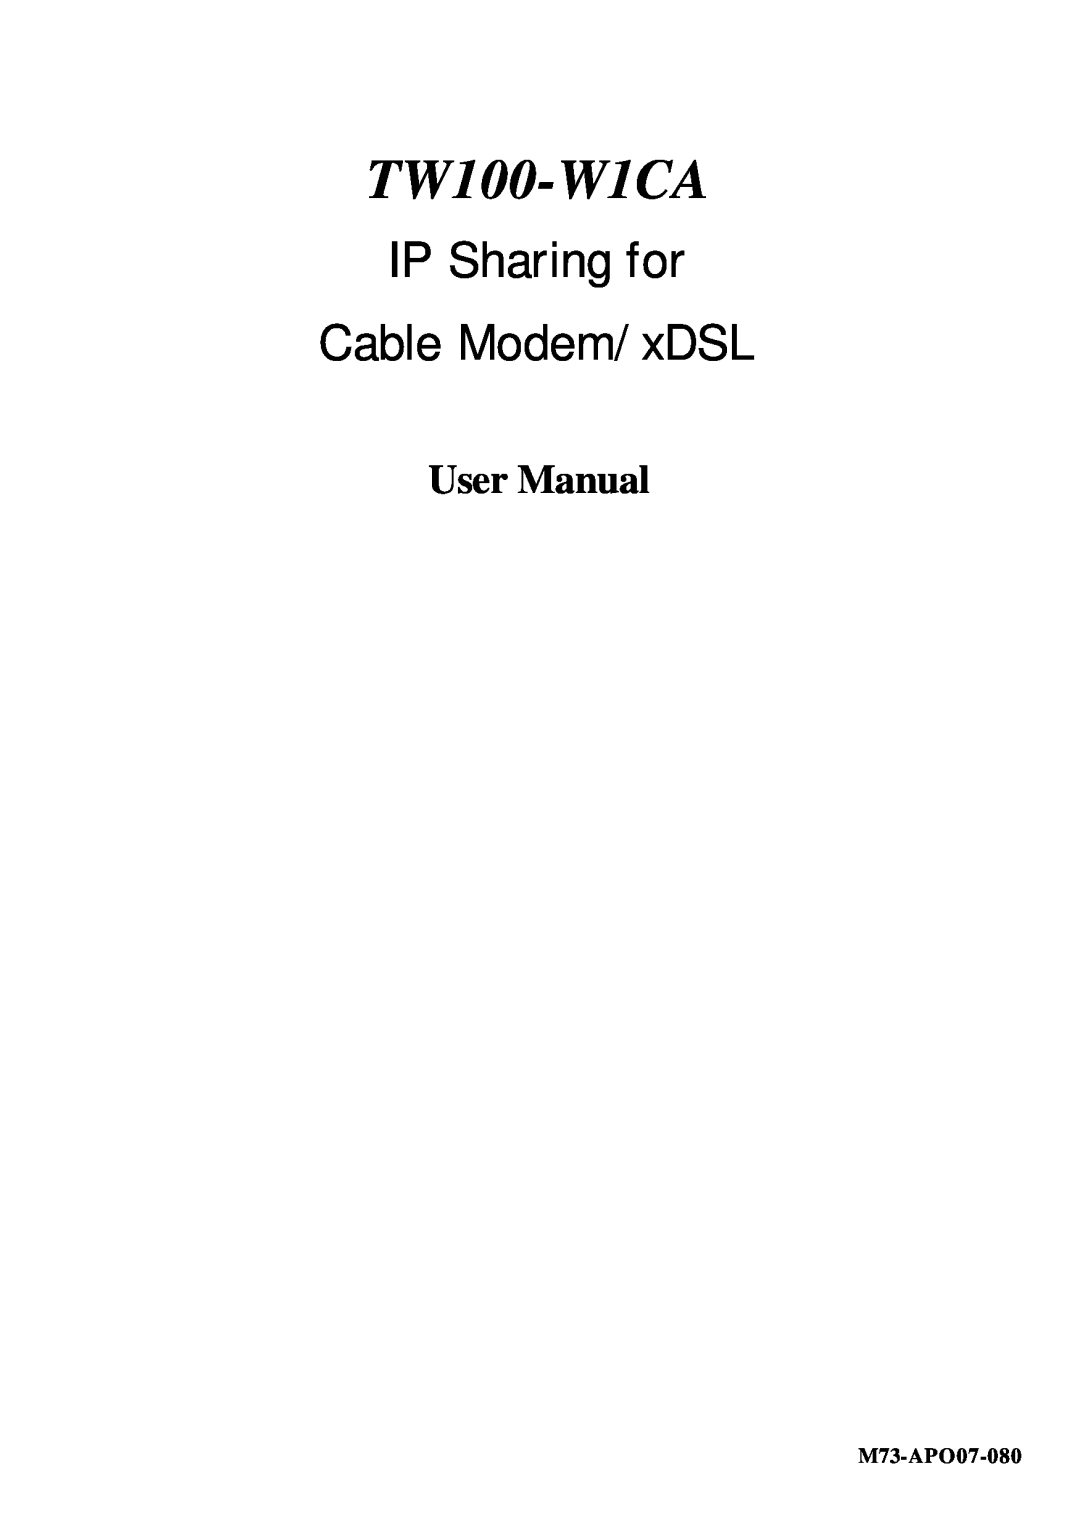 TRENDnet TW100-W1CA user manual IP Sharing for Cable Modem/xDSL, User Manual, M73-APO07-080 